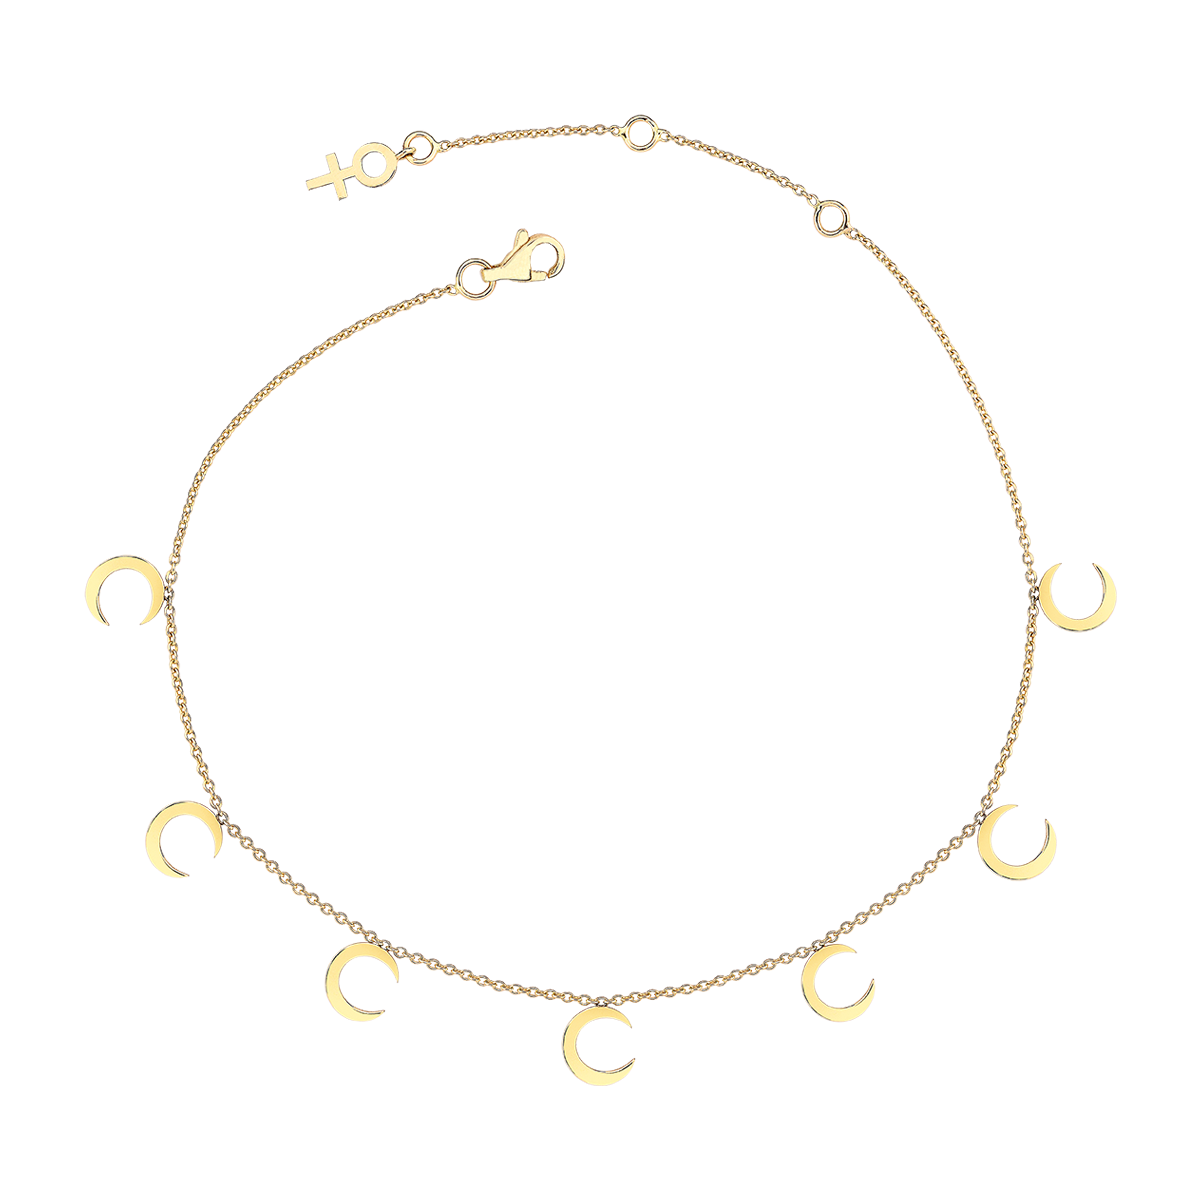 Selenophile Anklet in Yellow Gold - Her Story Shop